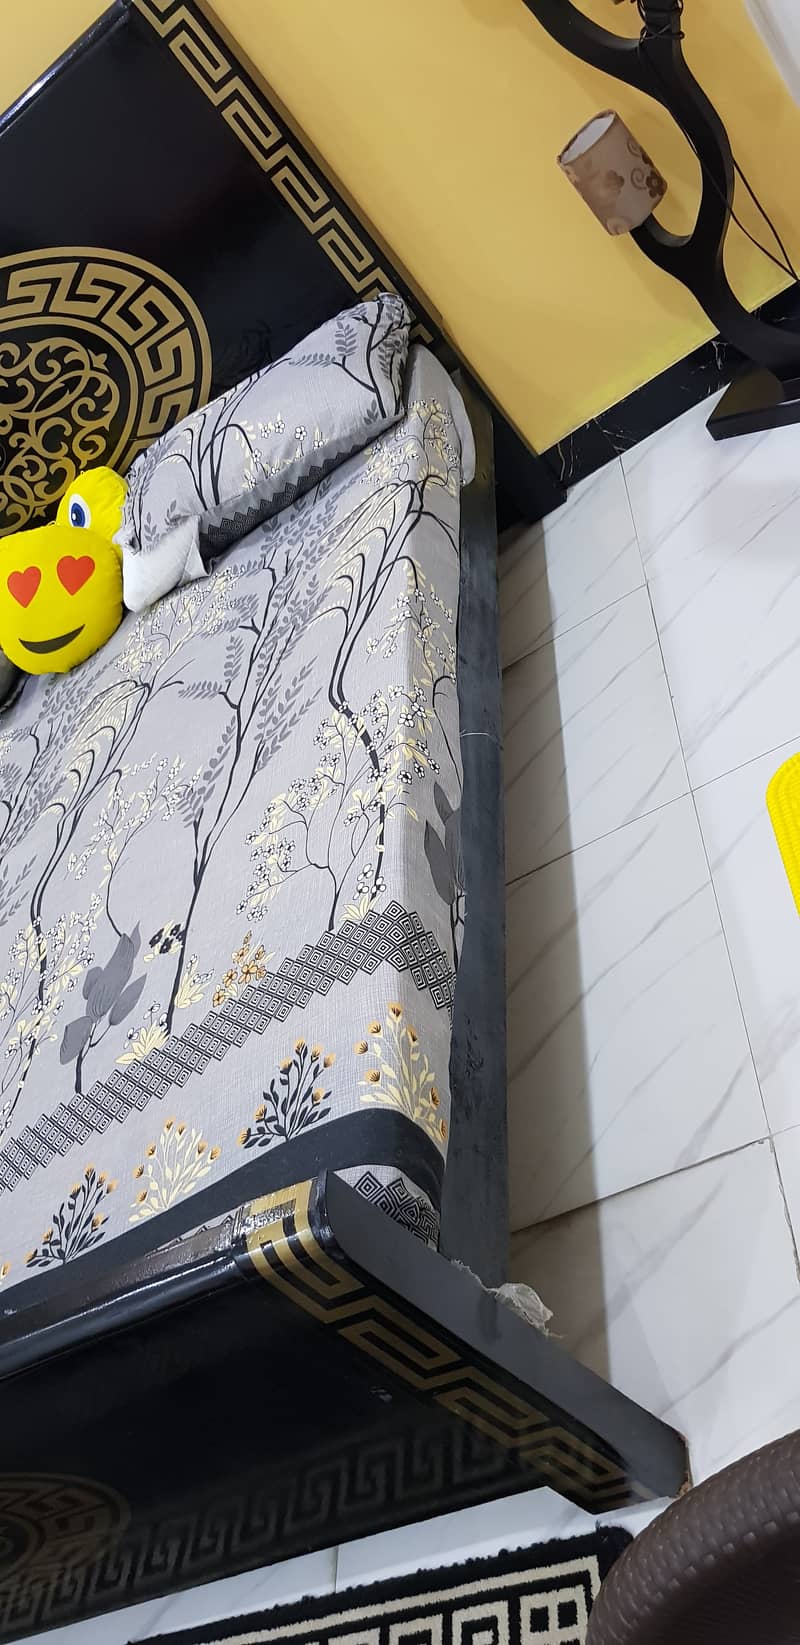 Premium and beautiful bed for sale in low price 2